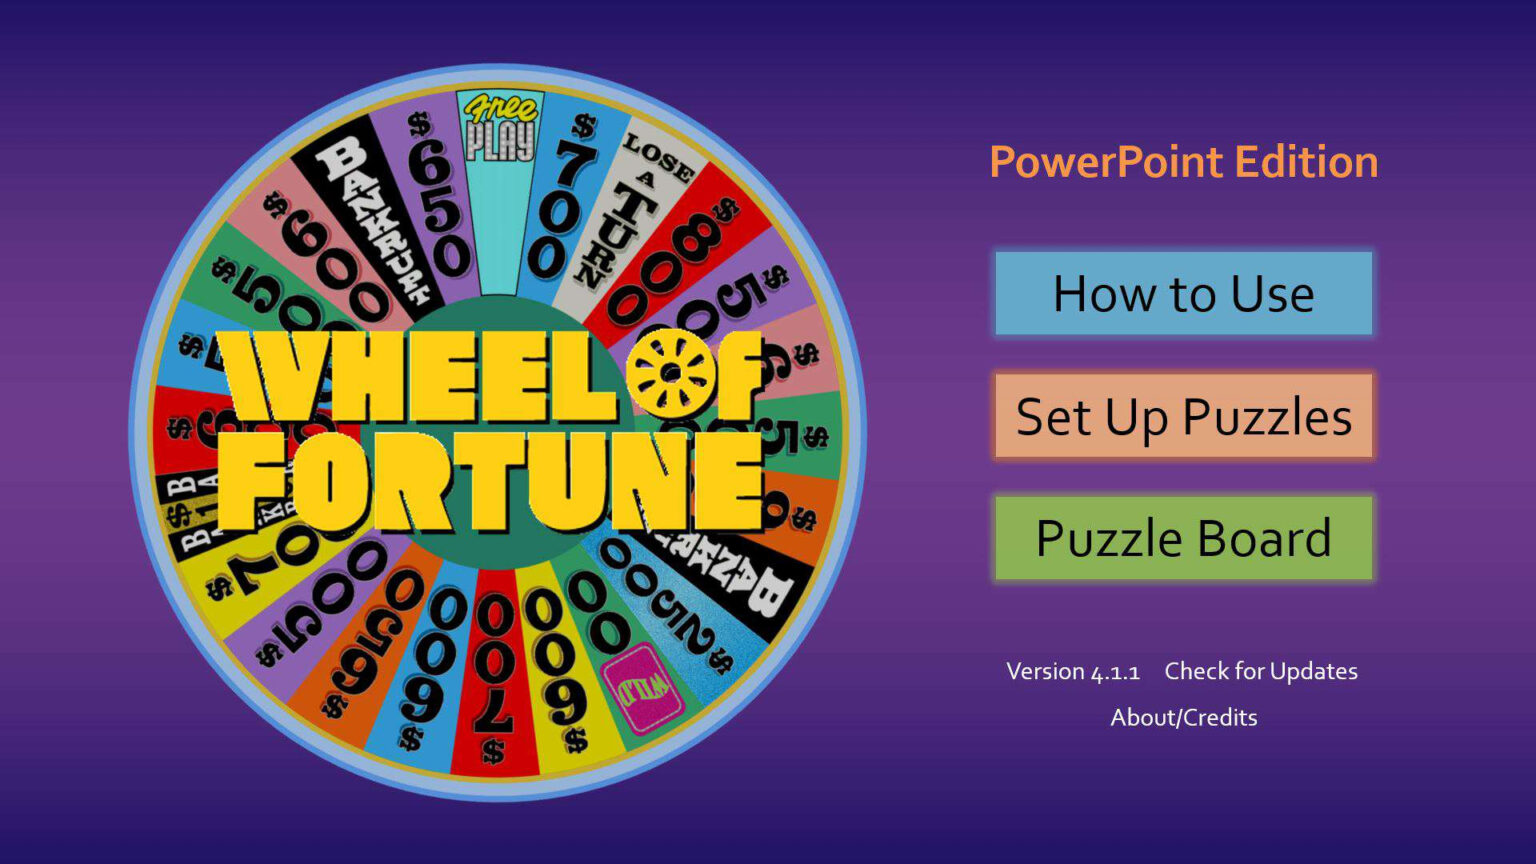 Price Is Right Game Show Powerpoint Template